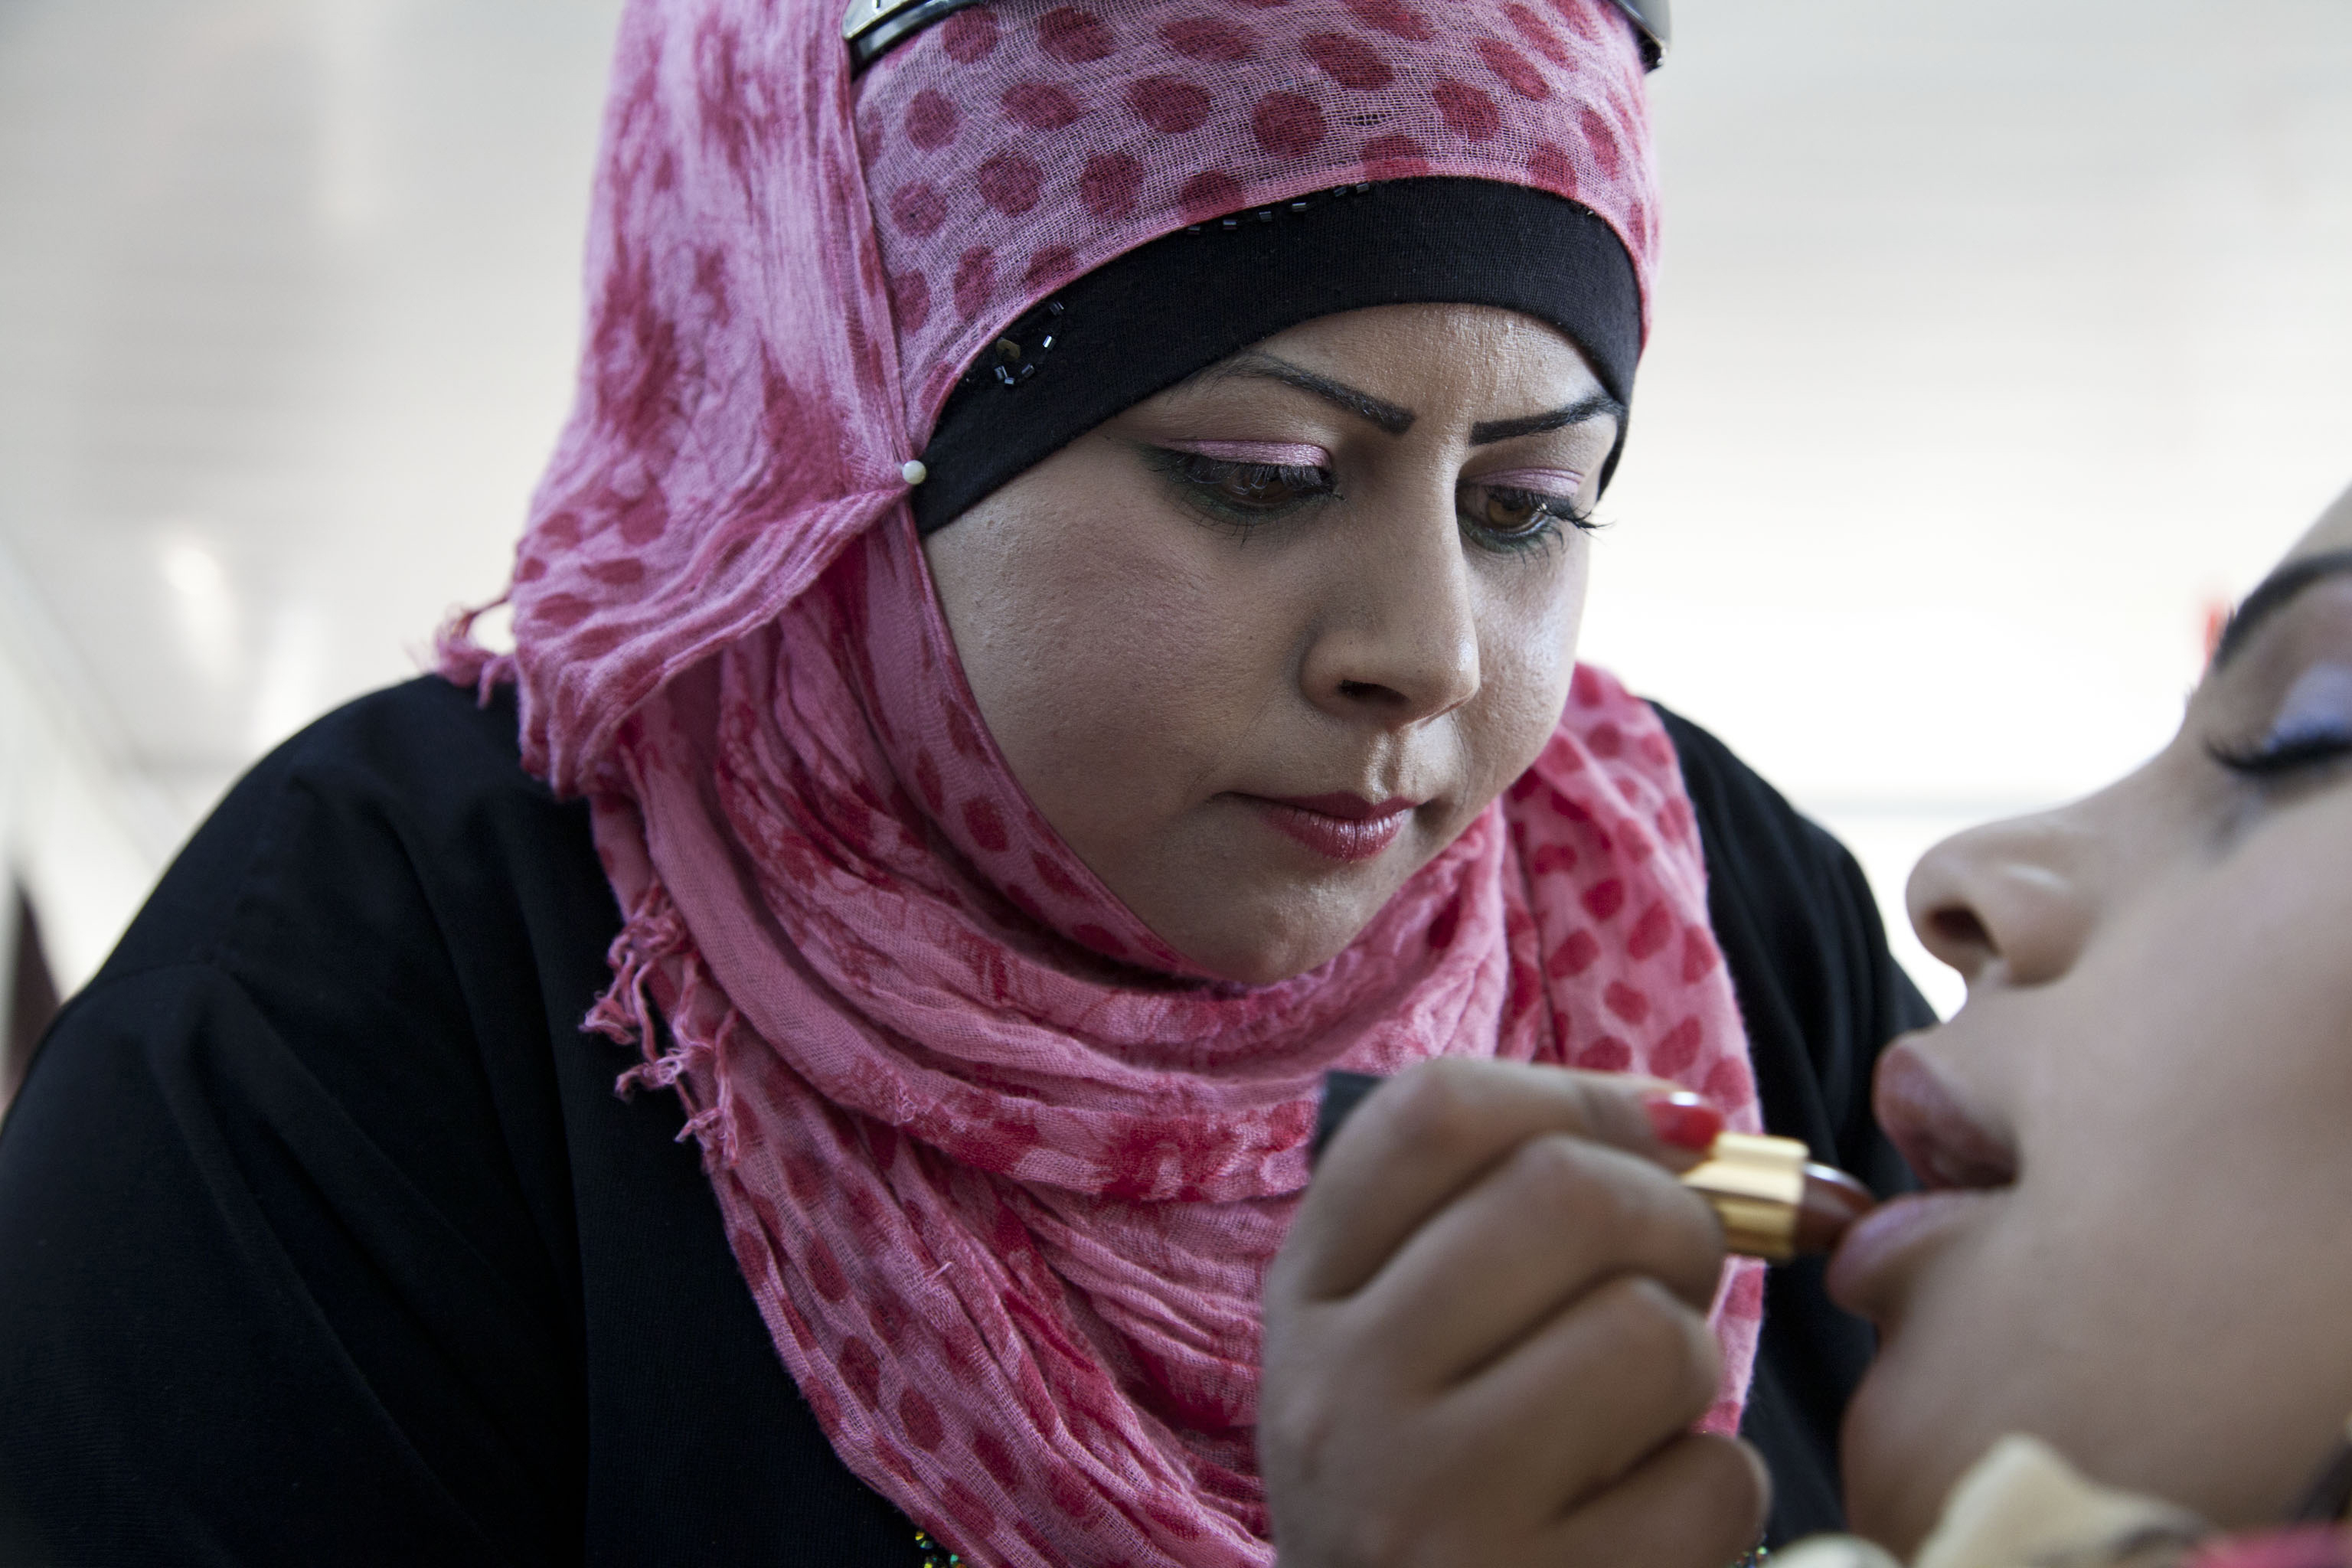 Syrian Refugee Women Are Not the Sum of Their Hardships | HuffPost The